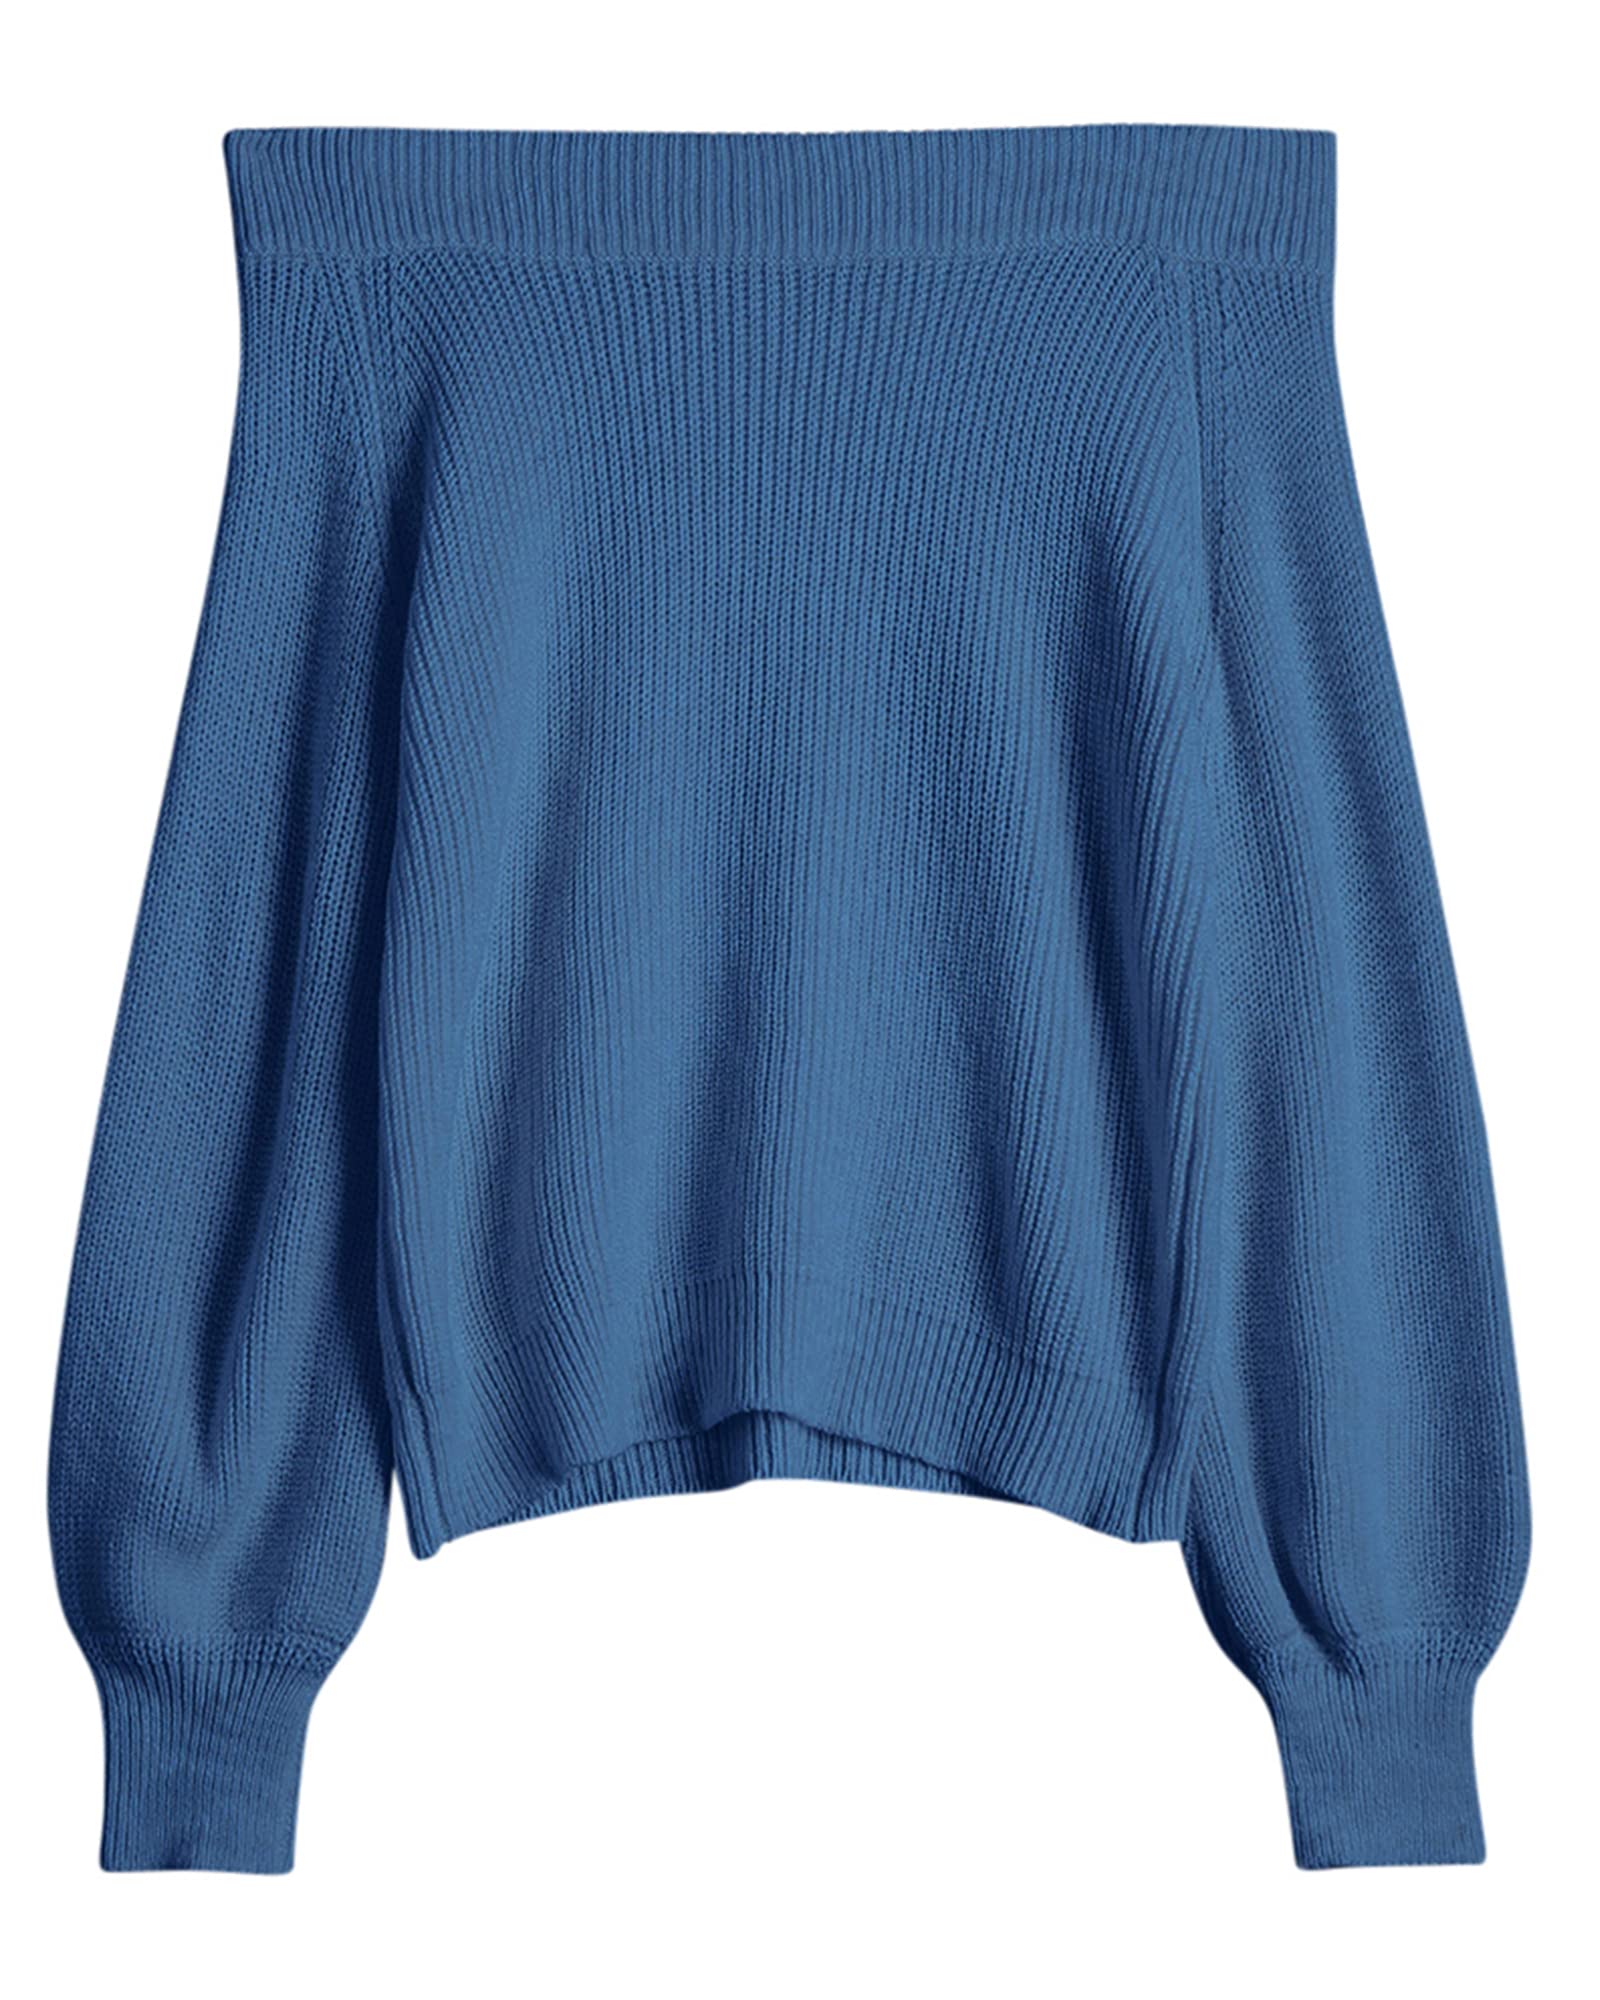 Book Cover ZAFUL Women Off Shoulder Sweater Long Sleeve Knit Sweater Loose Pullover Jumper Tops 1-blue One Size